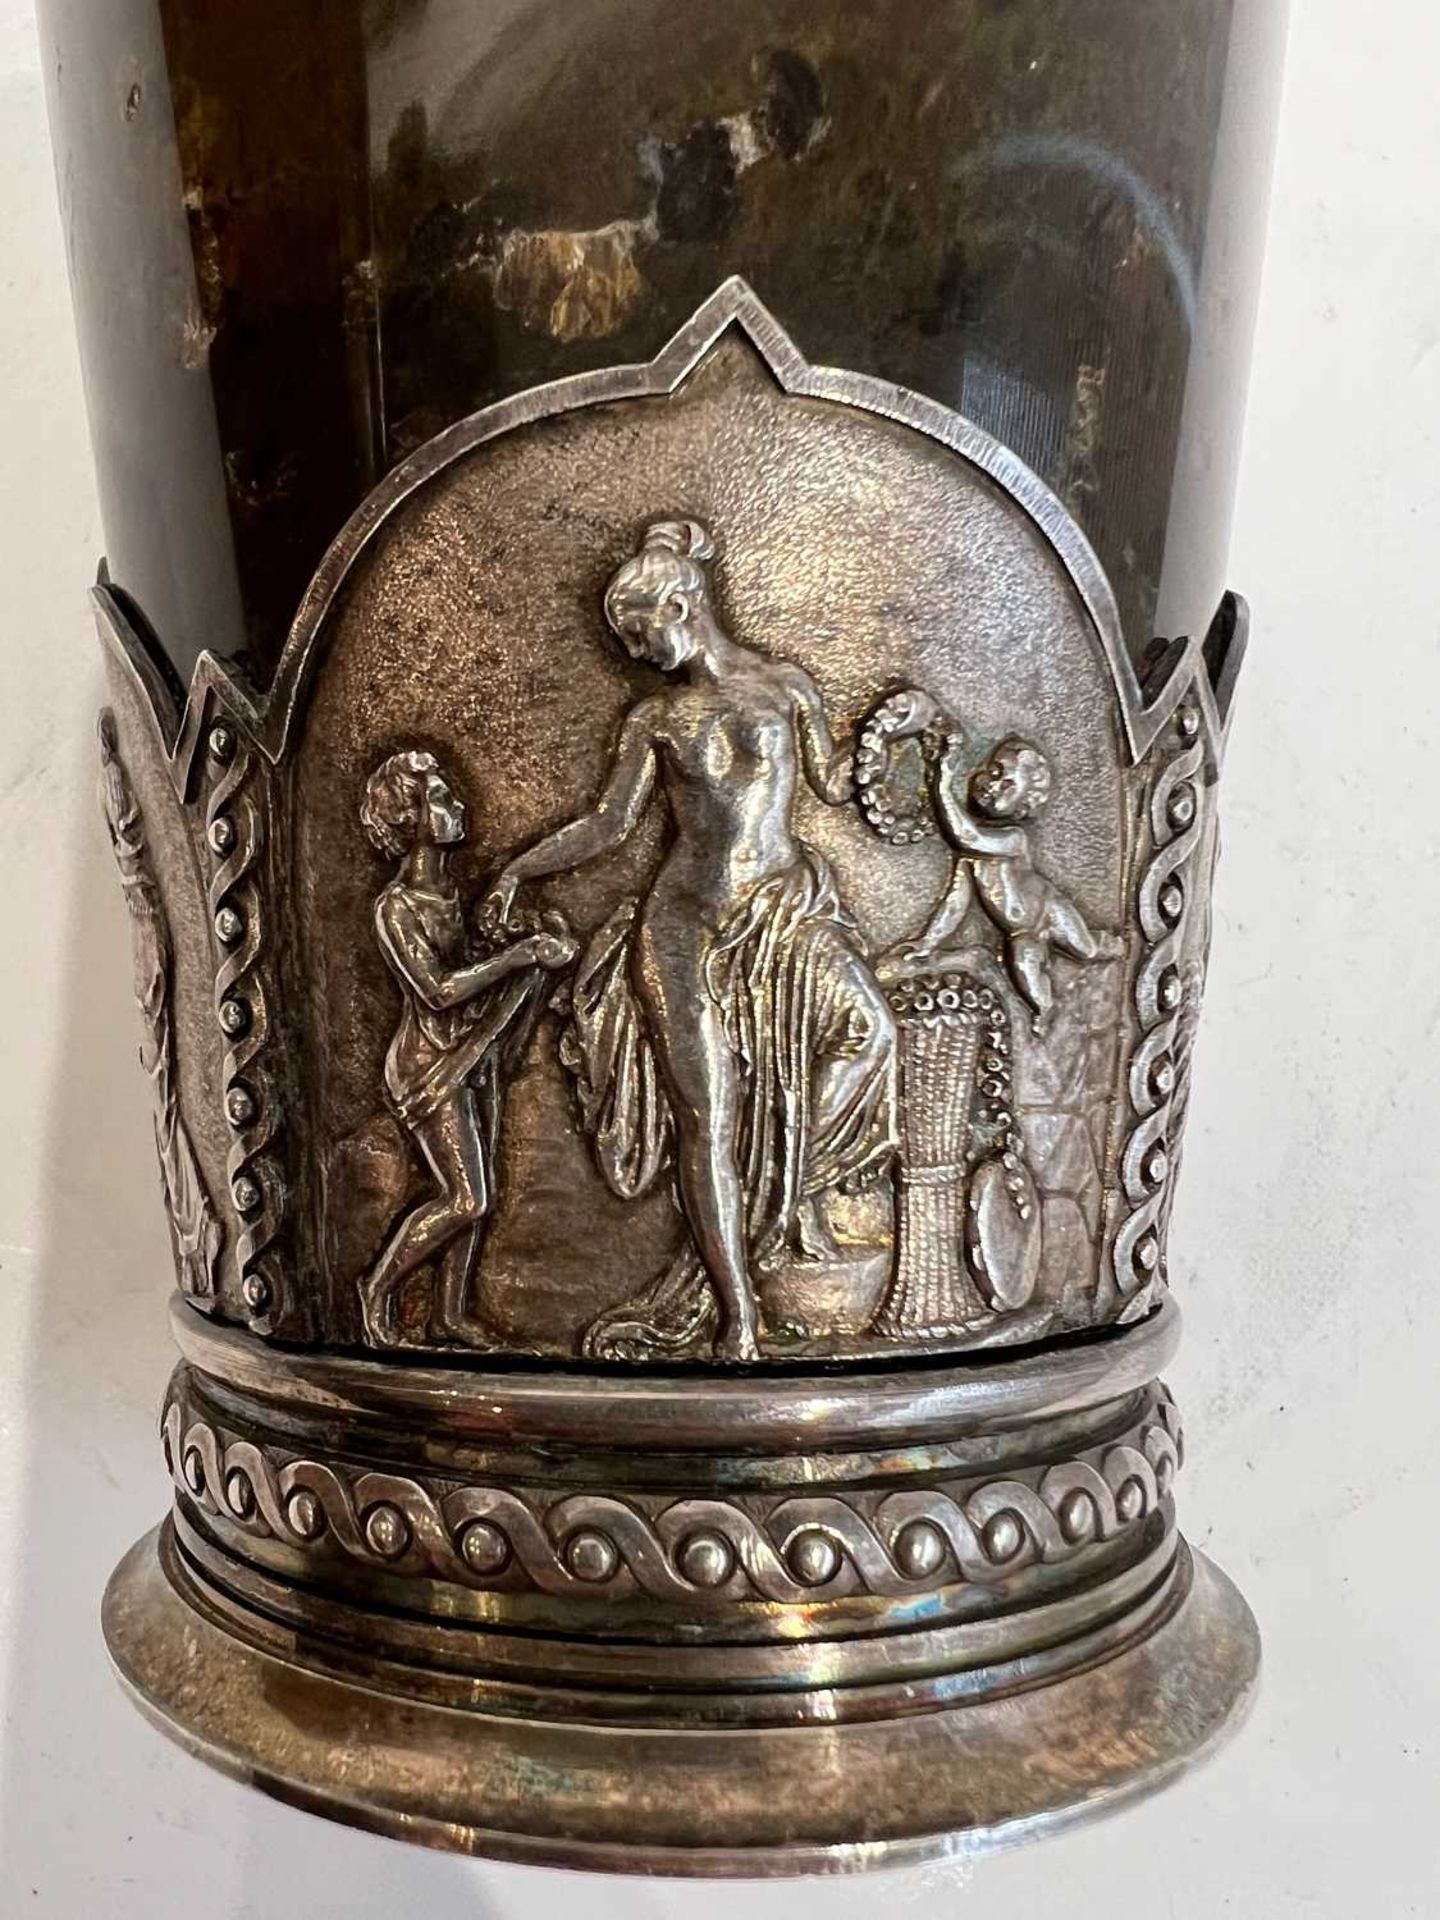 THE FOUR SEASONS CUP: A FINE 19TH CENTURY SILVER MOUNTED CUP WITH RELIEFS AFTER THORVALDSEN - Image 3 of 6